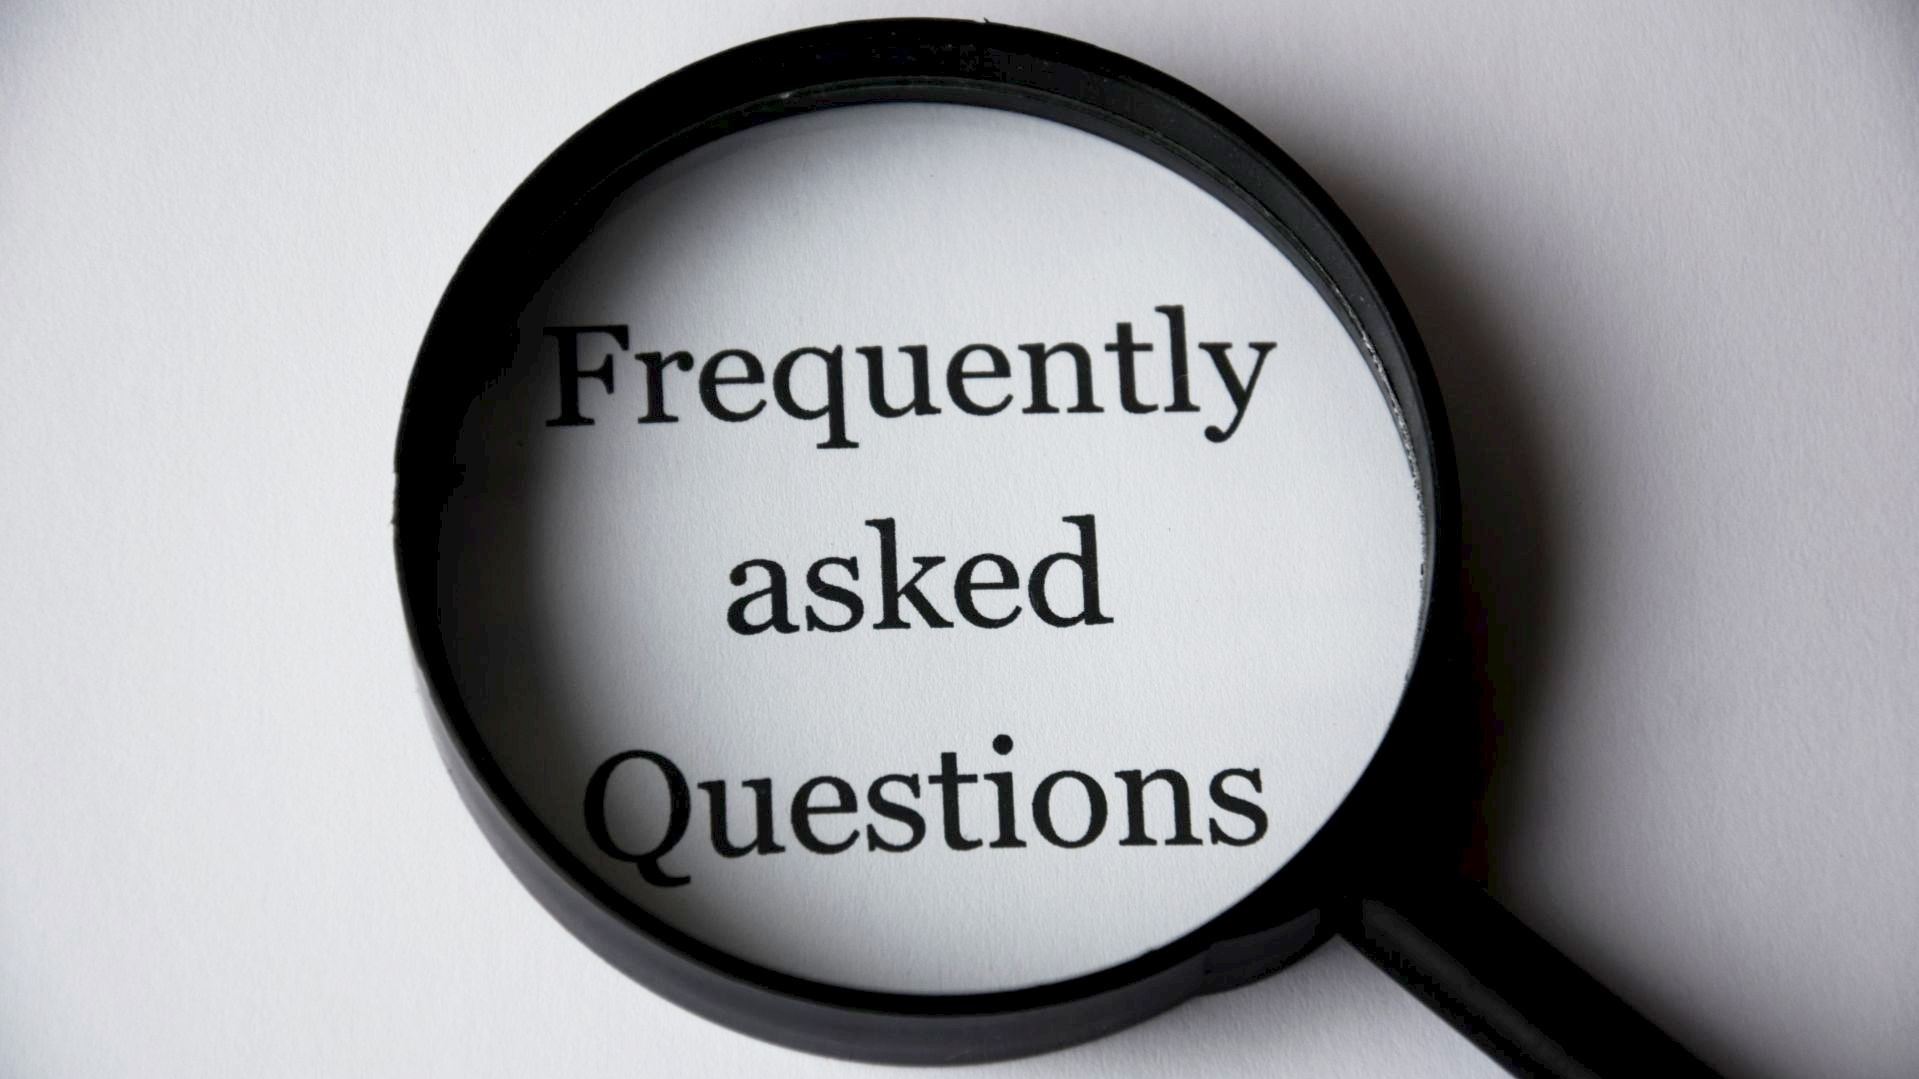 magnifying glass over the word 'Frequently asked Questions"